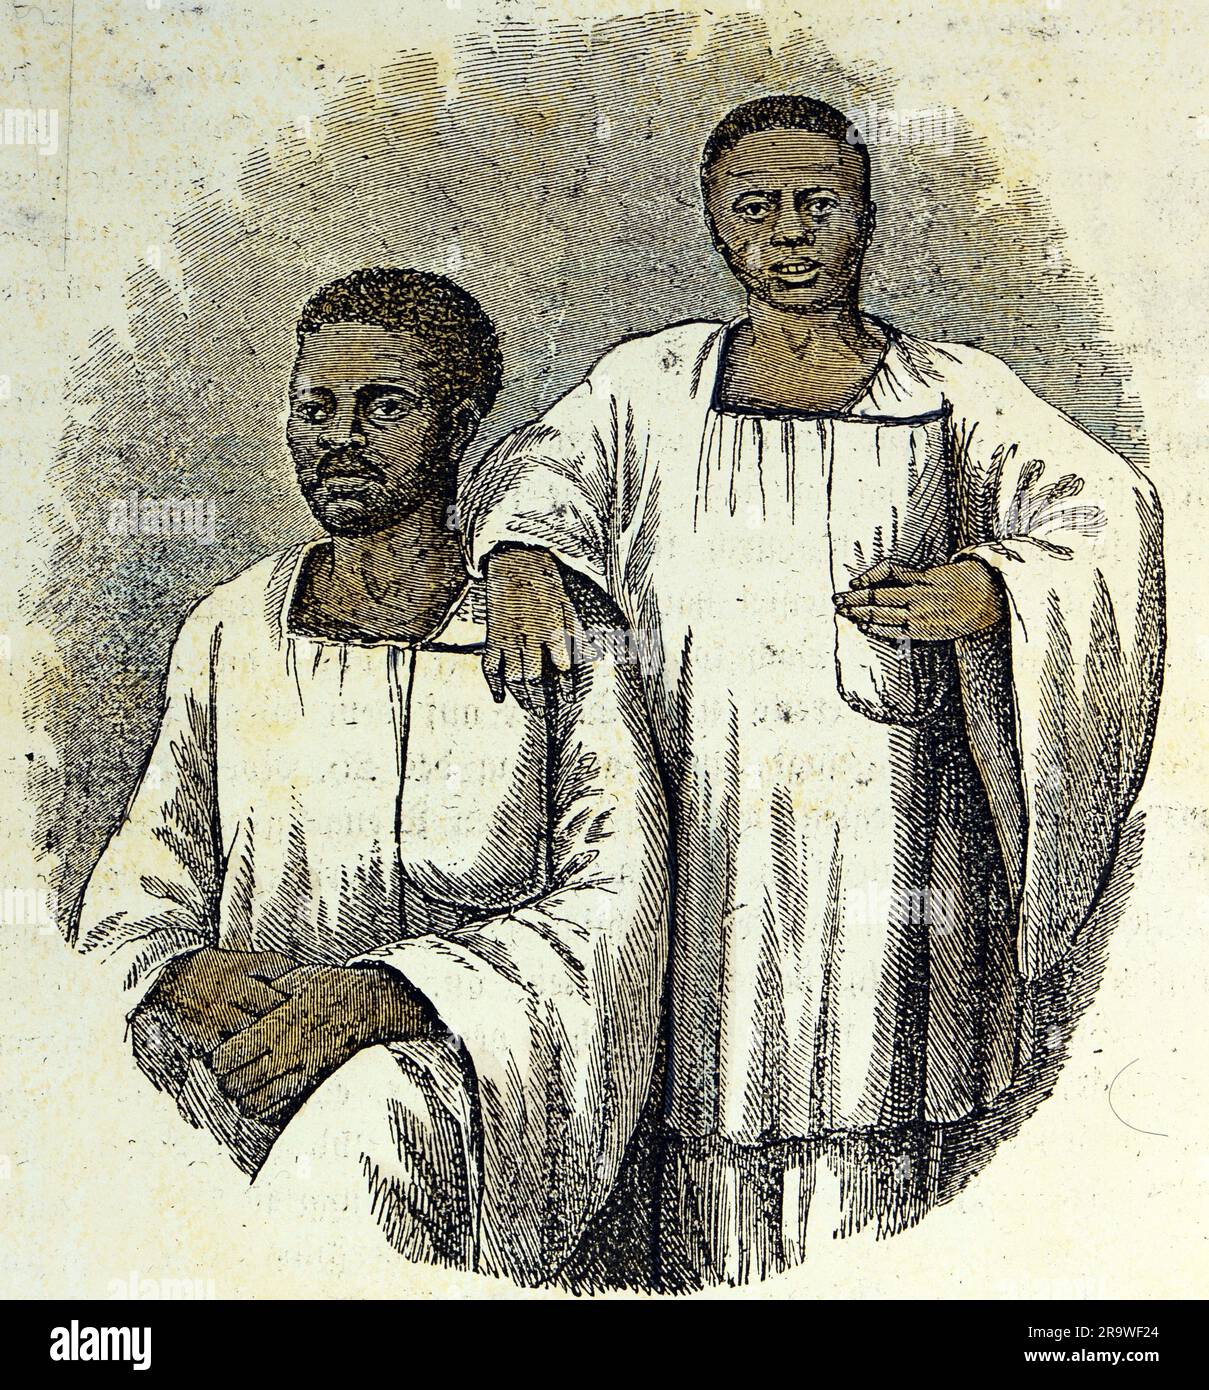 geography / travel, Africa, people, former slaves Abbega and Dyrregu, coloured wood engraving, ARTIST'S COPYRIGHT HAS NOT TO BE CLEARED Stock Photo